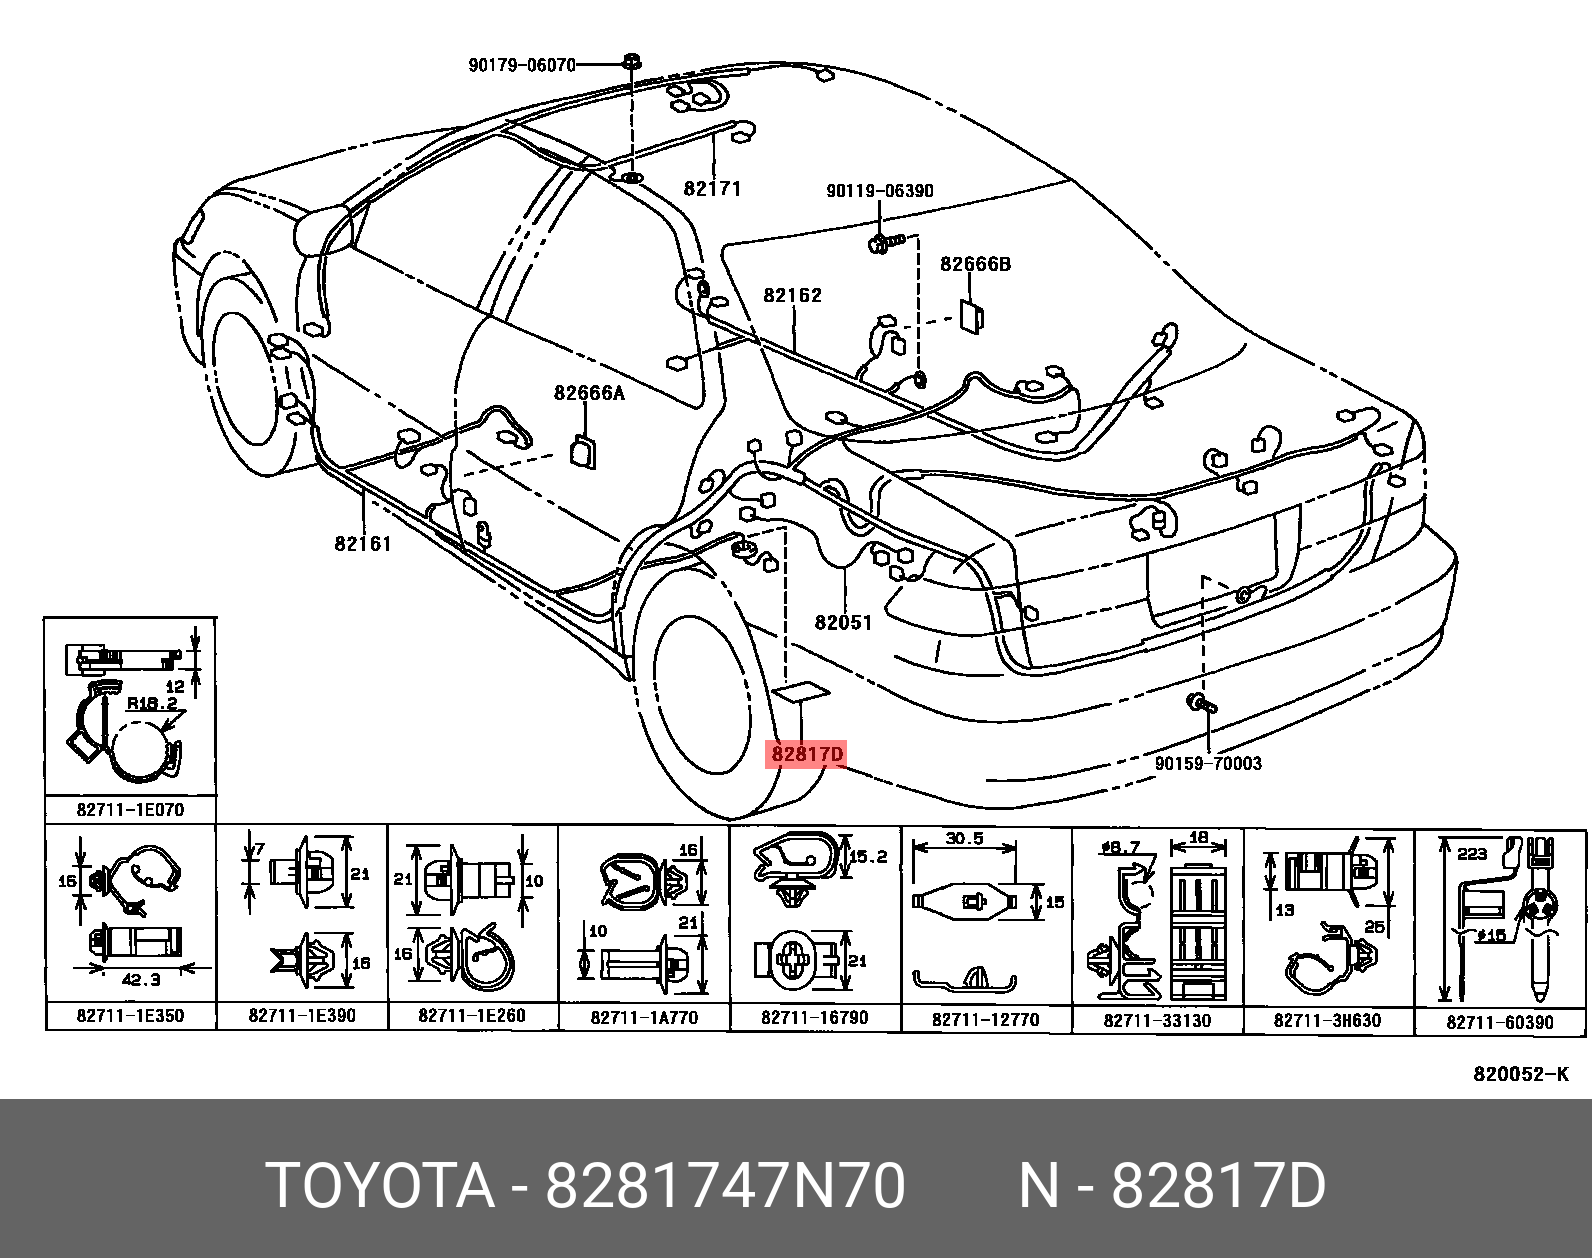 PRIUS 201511 -, PROTECTOR, WIRING HARNESS, NO.4